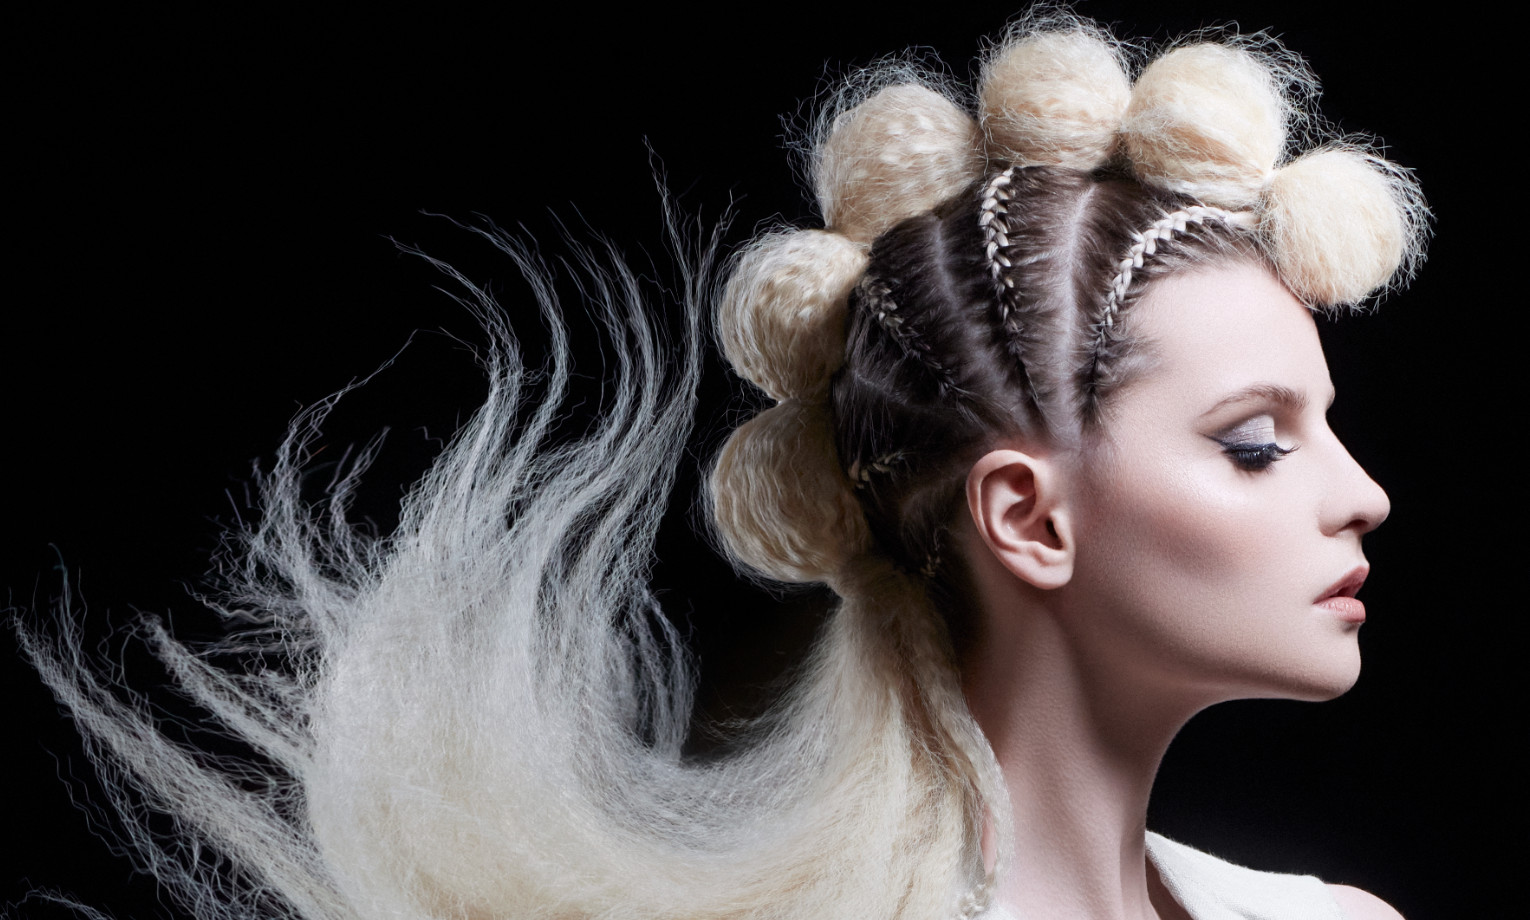 Bl ack collection by david corbett hairdressing